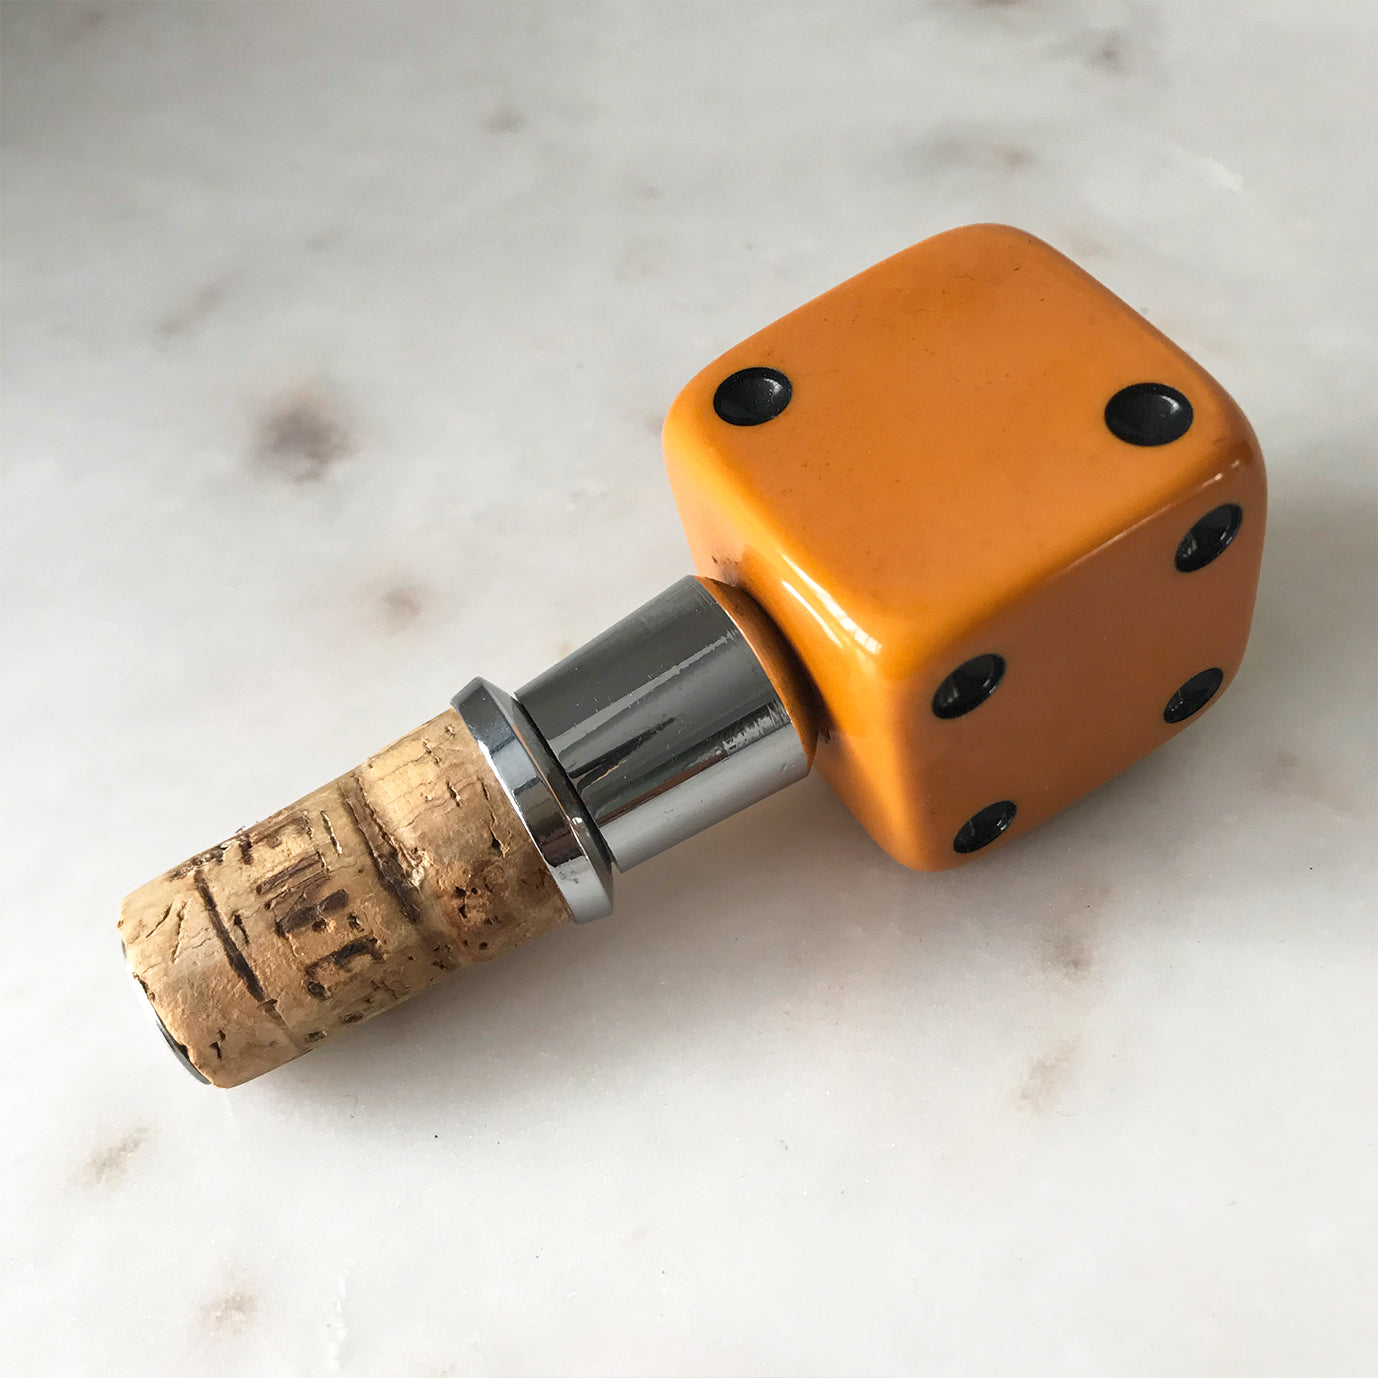 Three deep orange vintage dice all doing a job... One sits atop your bottle replacing the cork, pull off the dice and it becomes a pourer. The second dice is your corkscrew whilst the third dice opens your beer bottles - SHOP NOW - www.intovintage.co.uk